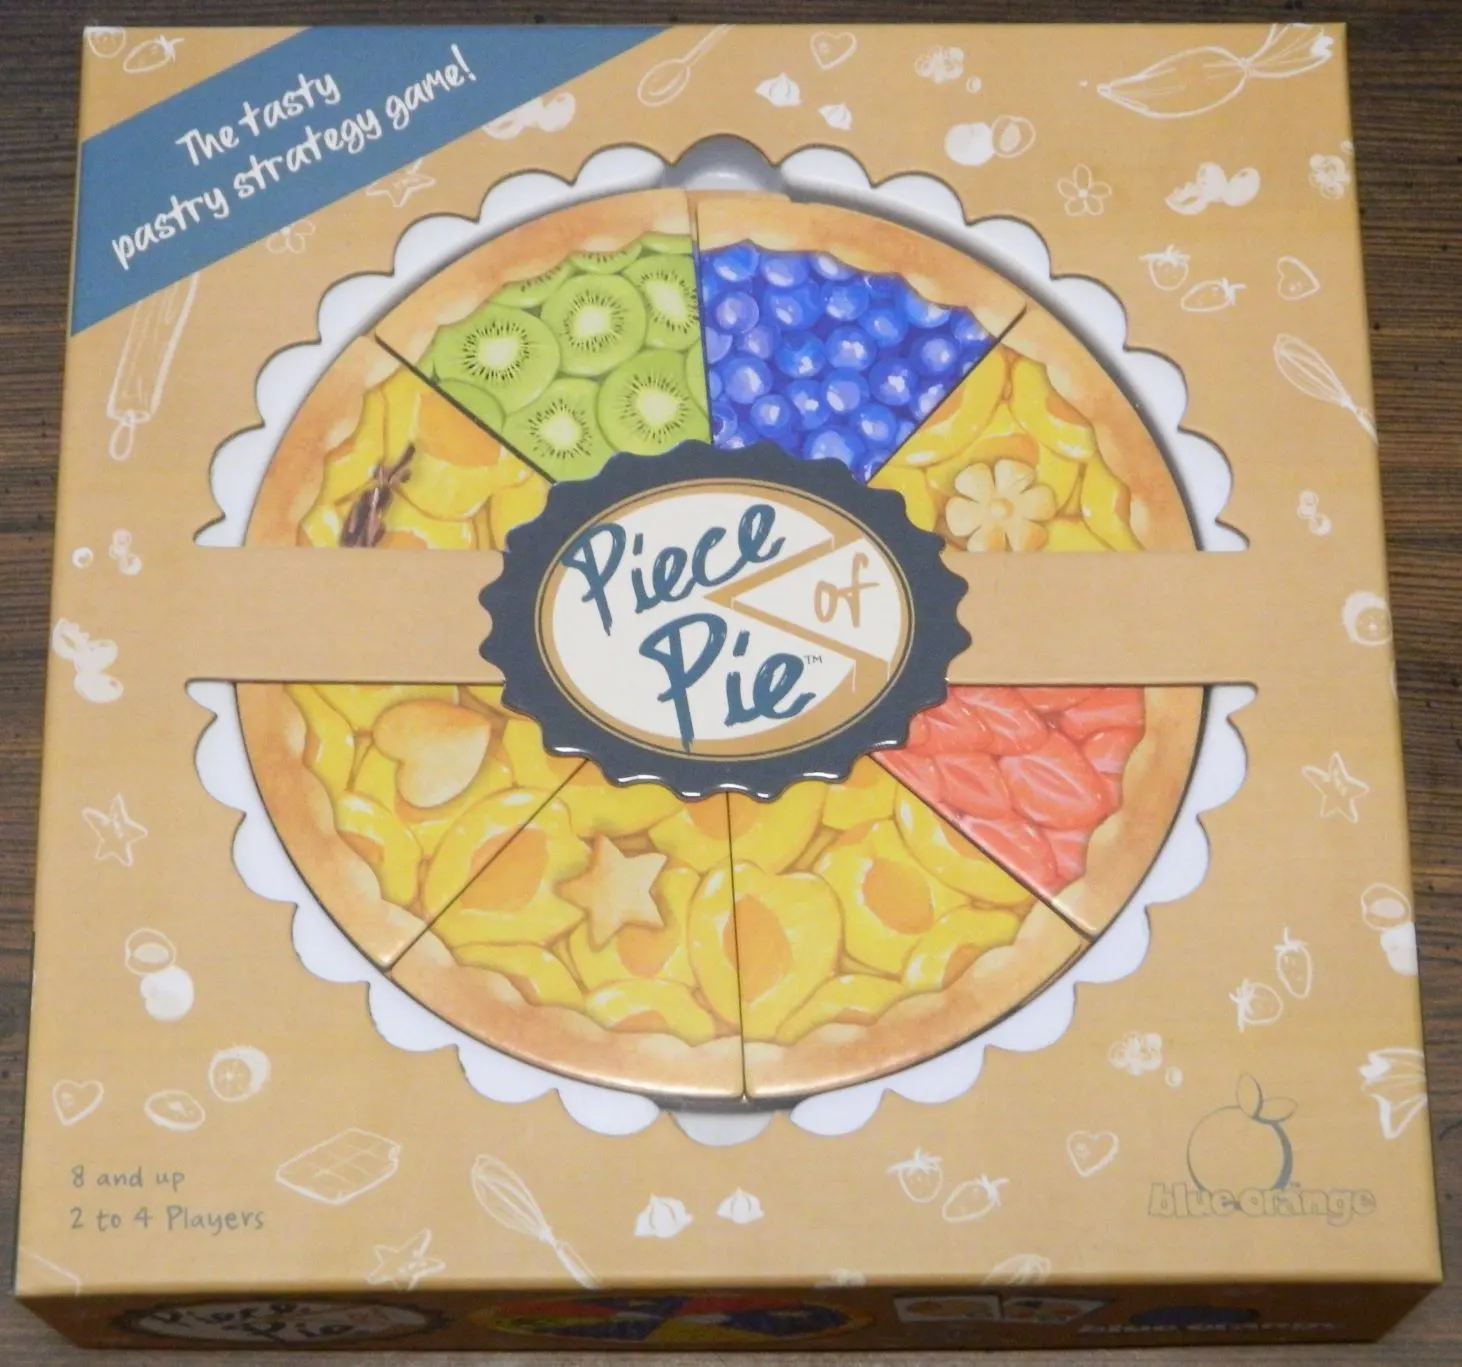 Box for Piece of Pie